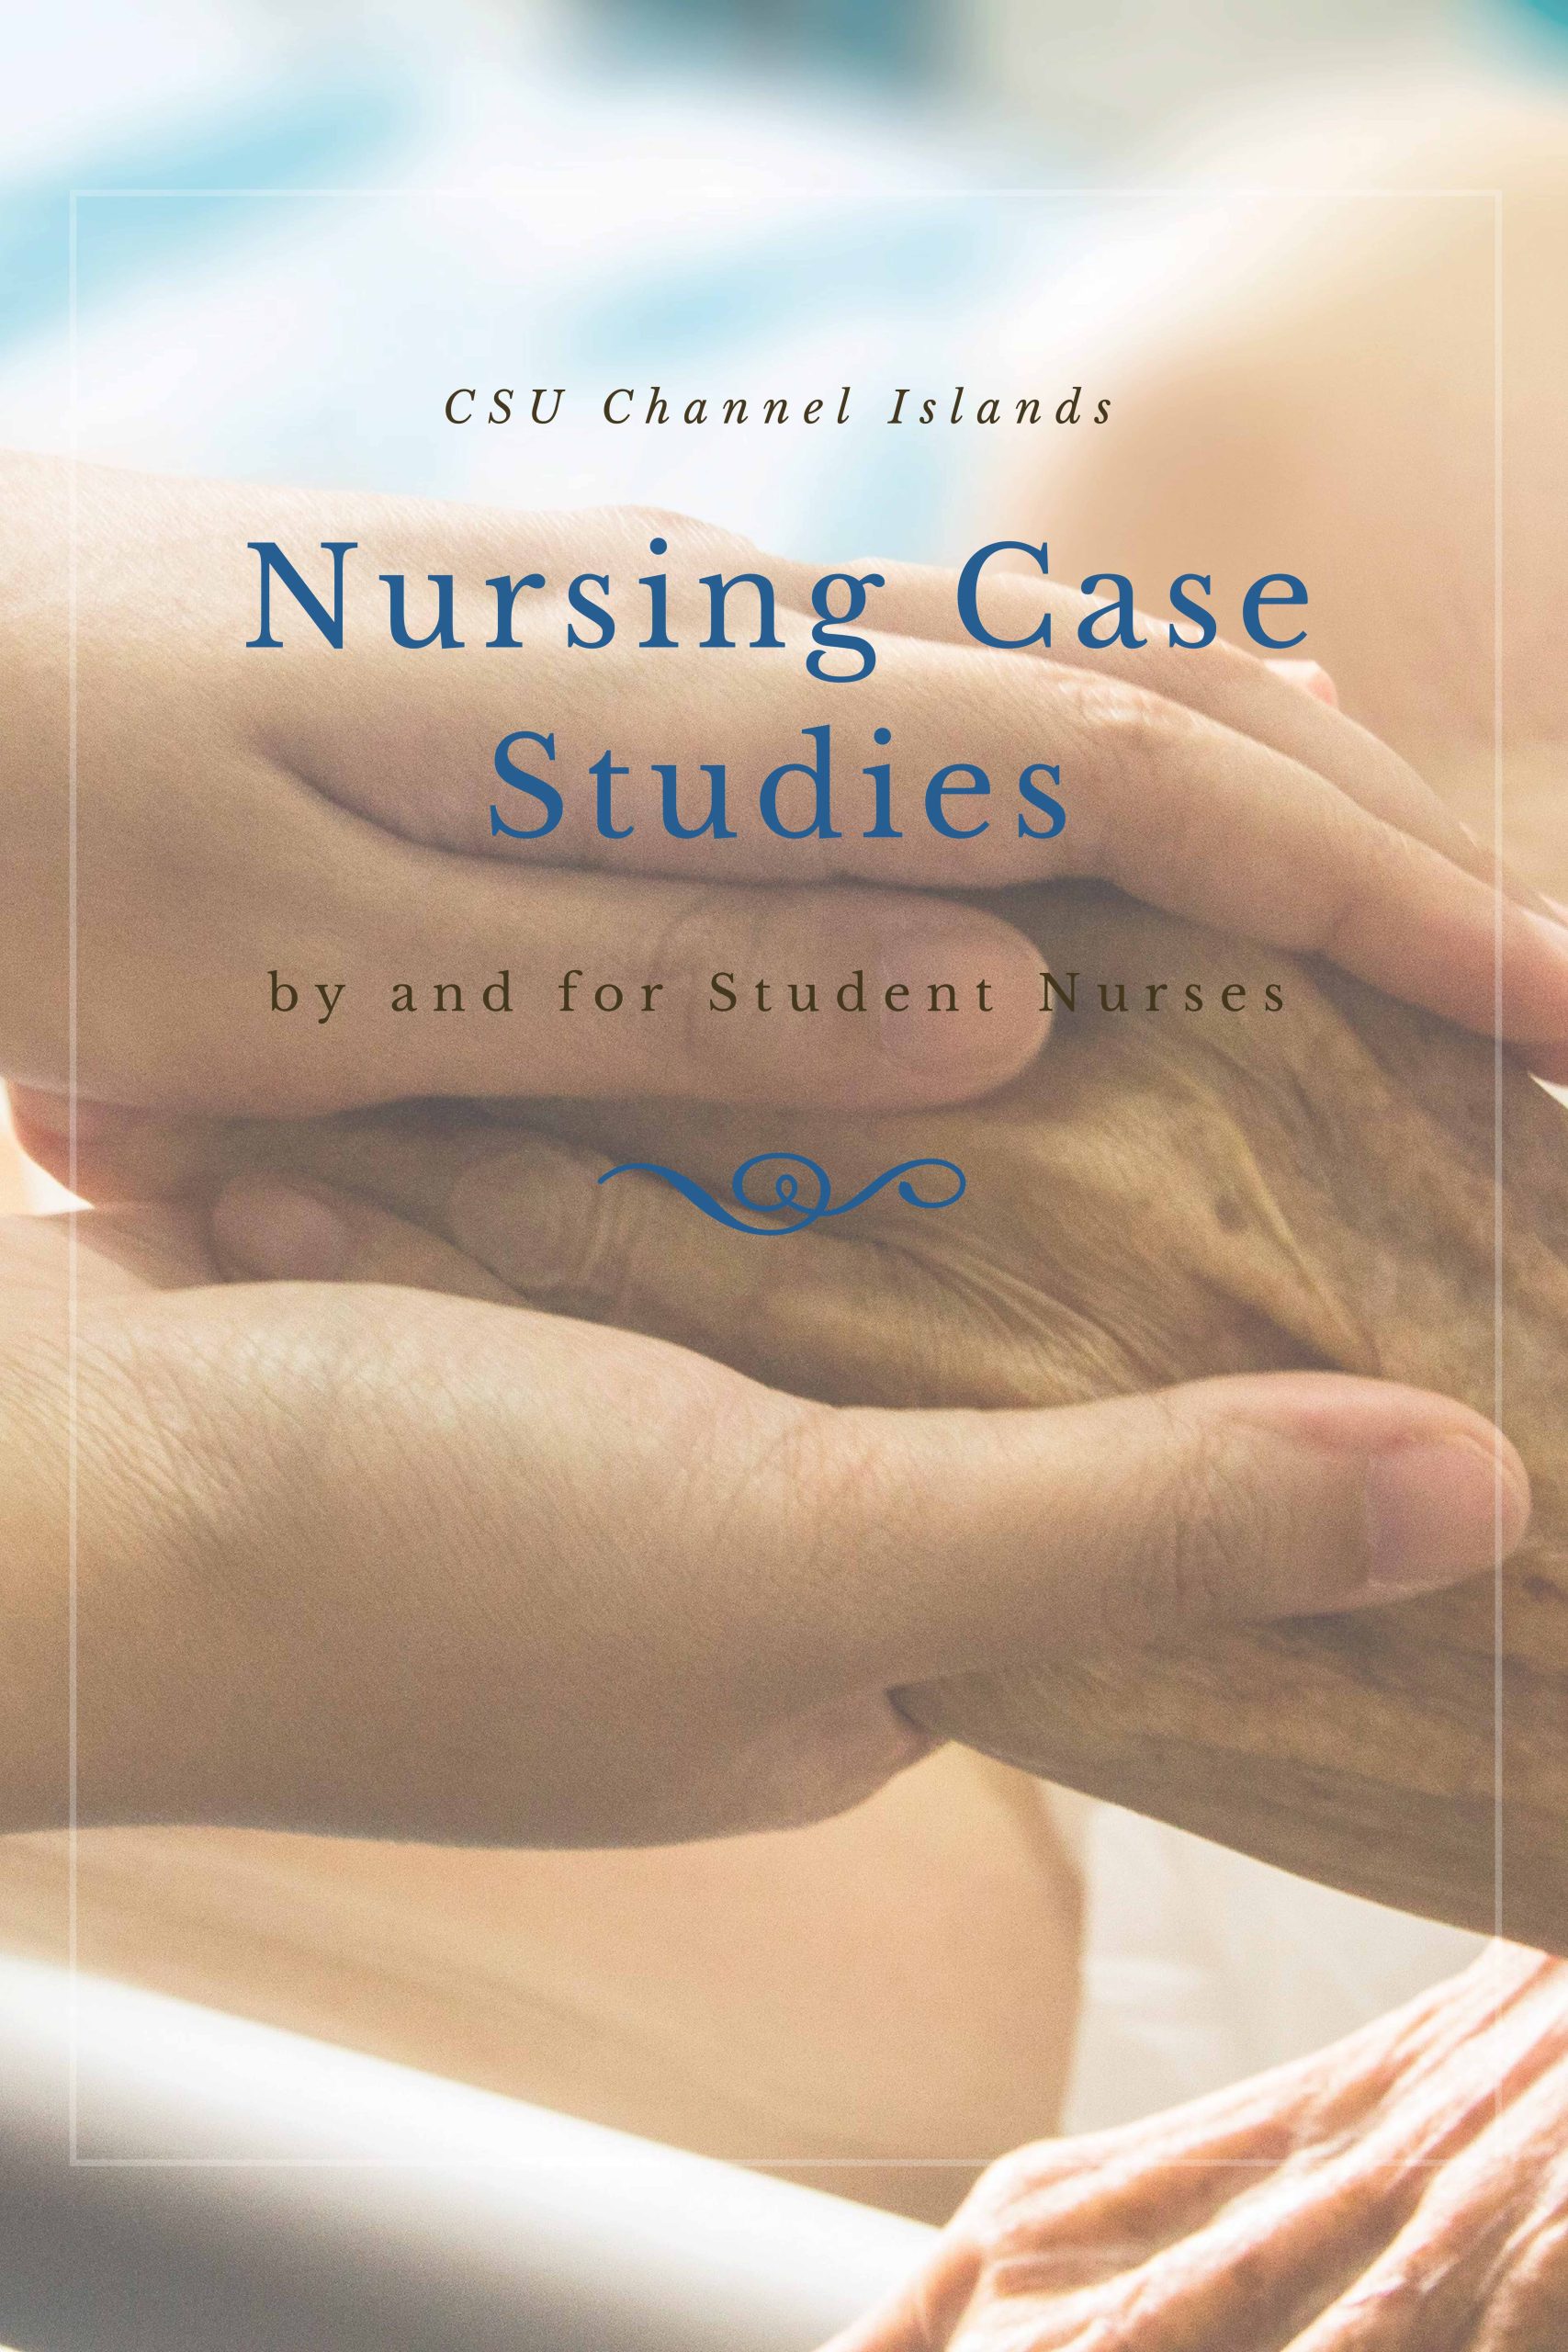 why is case study important in nursing